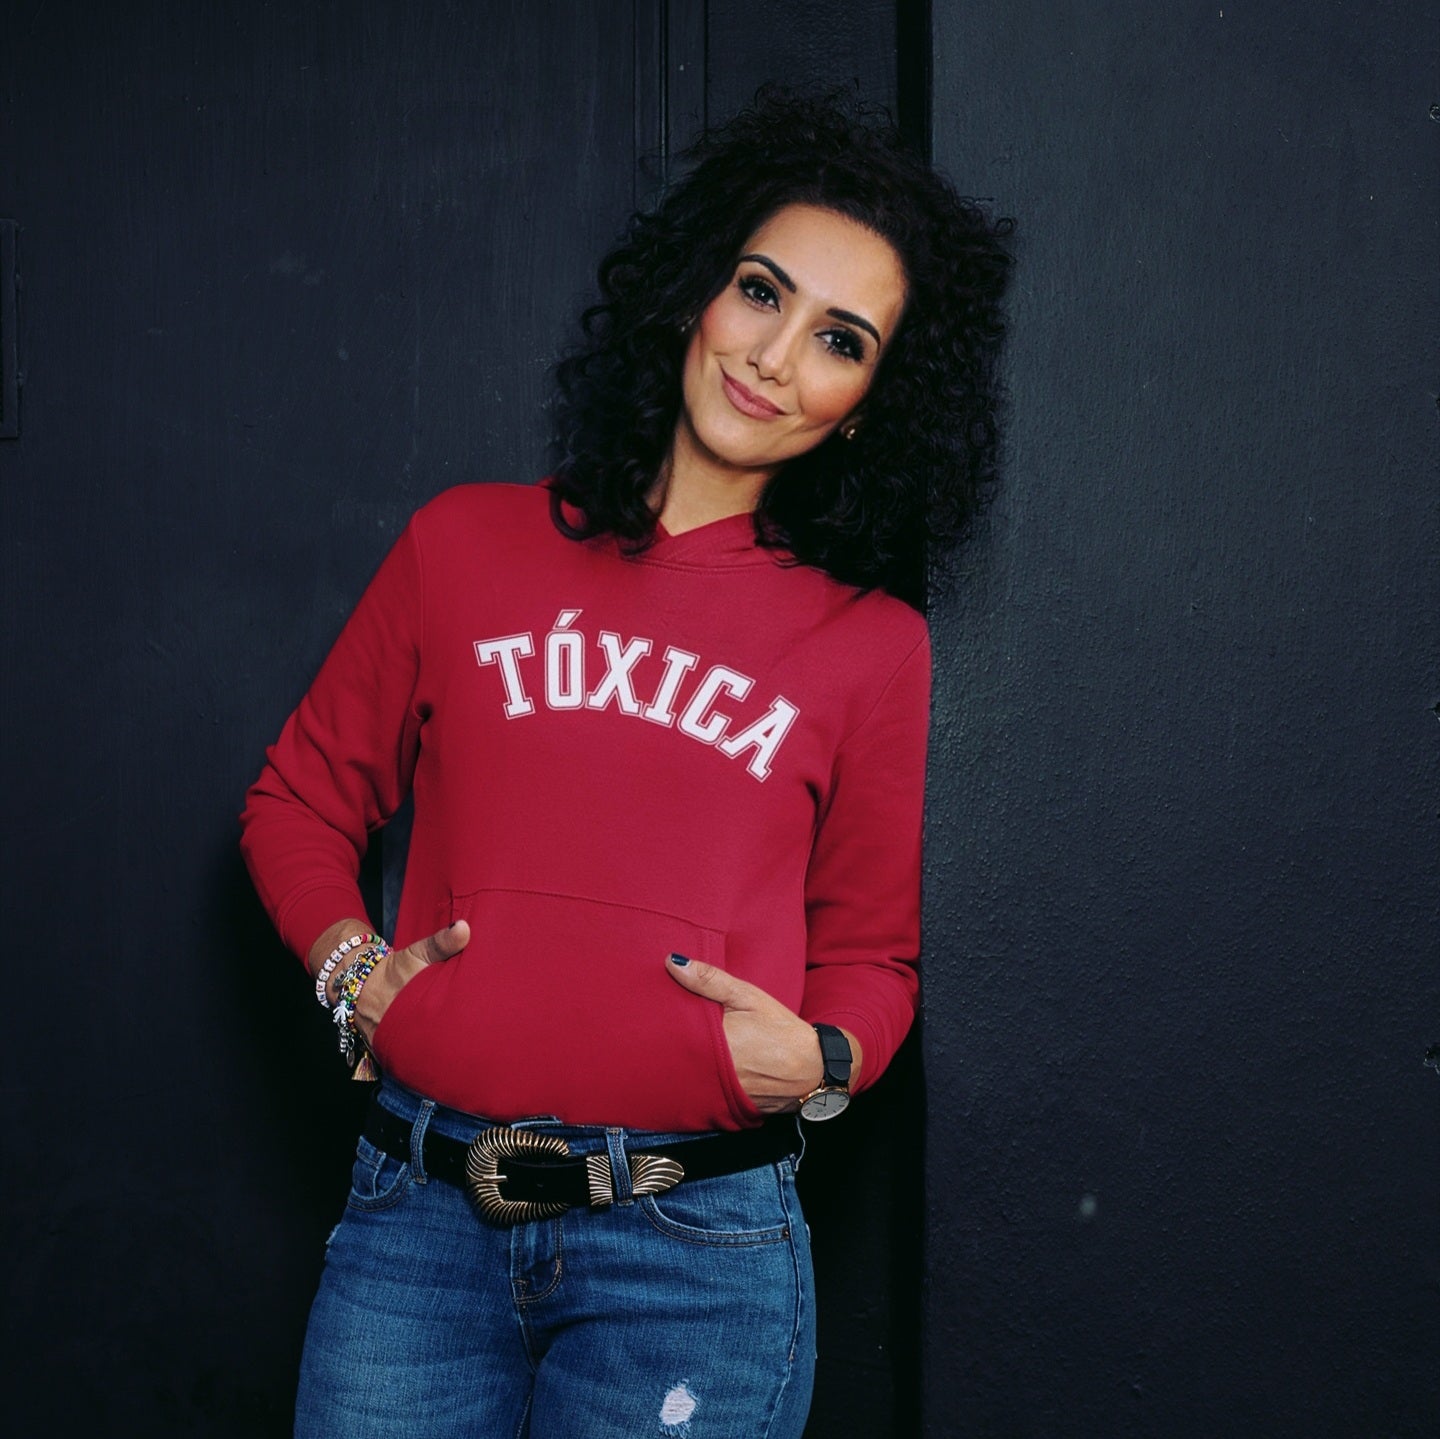 Latina wearing a women's red hoodie sweatshirt with the word 'Toxica' written in white vintage arch-style lettering